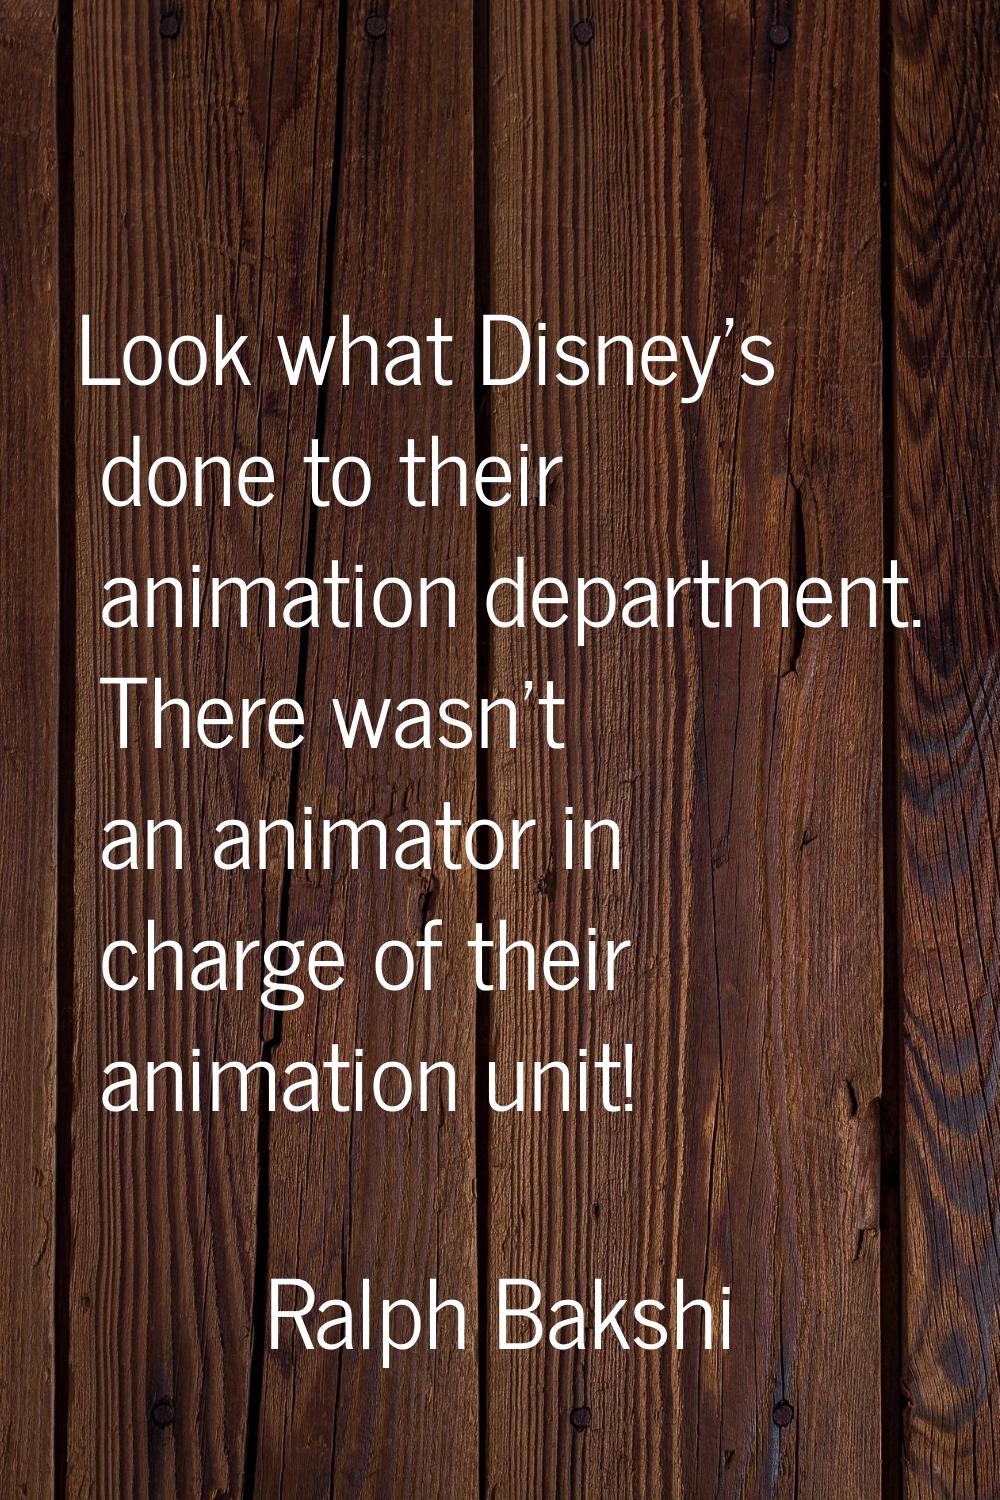 Look what Disney's done to their animation department. There wasn't an animator in charge of their 